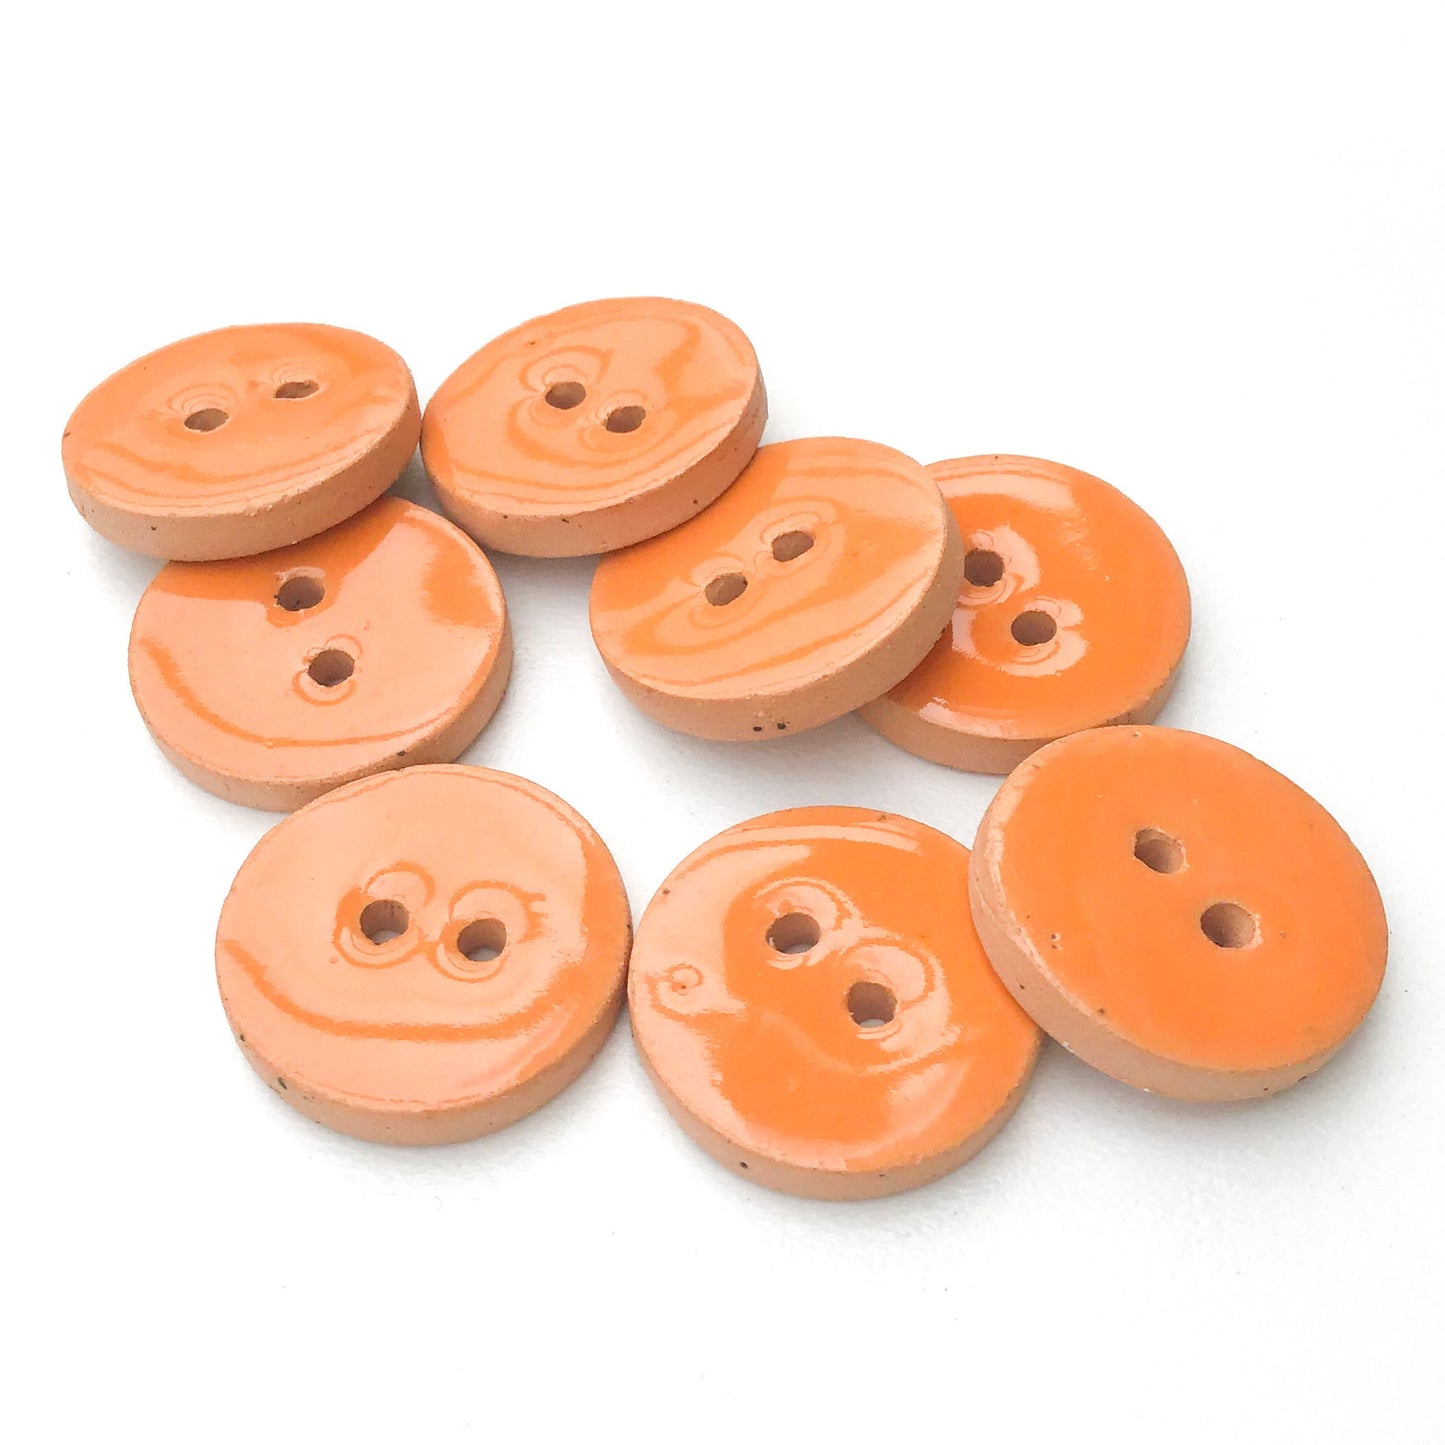 Peachy Orange Ceramic Buttons - Orange Clay Buttons - 3/4" - 8 Pack (ws-157)